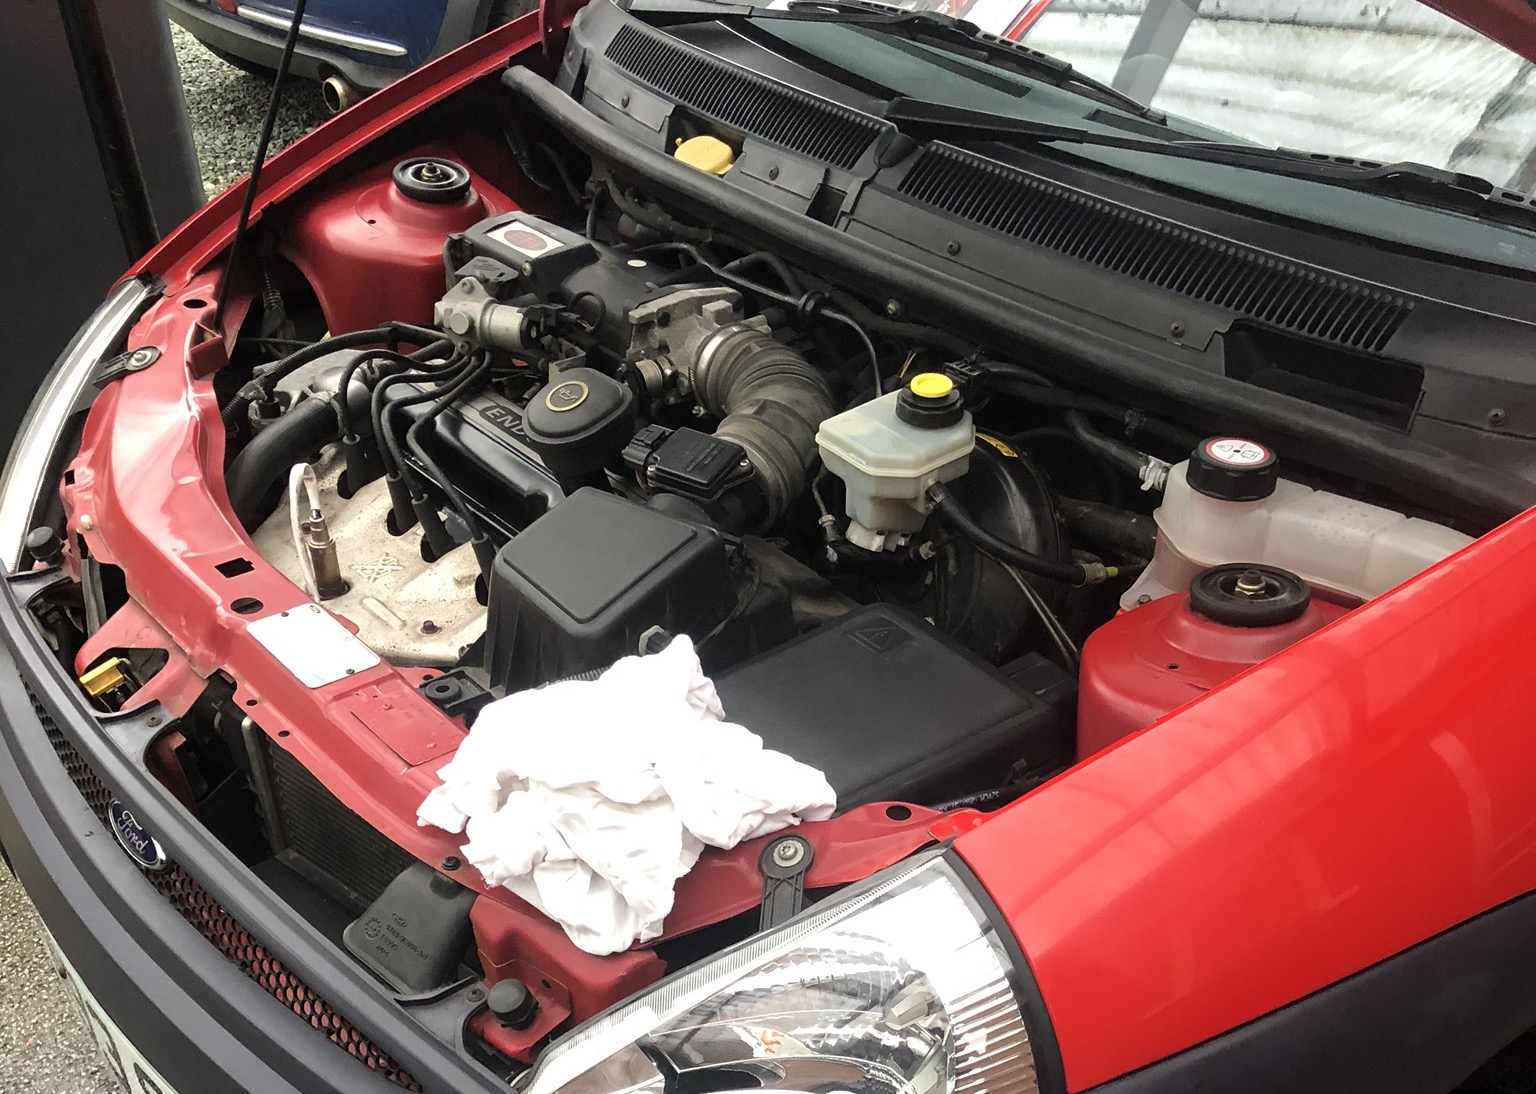 Unexceptional Ford Ka engine